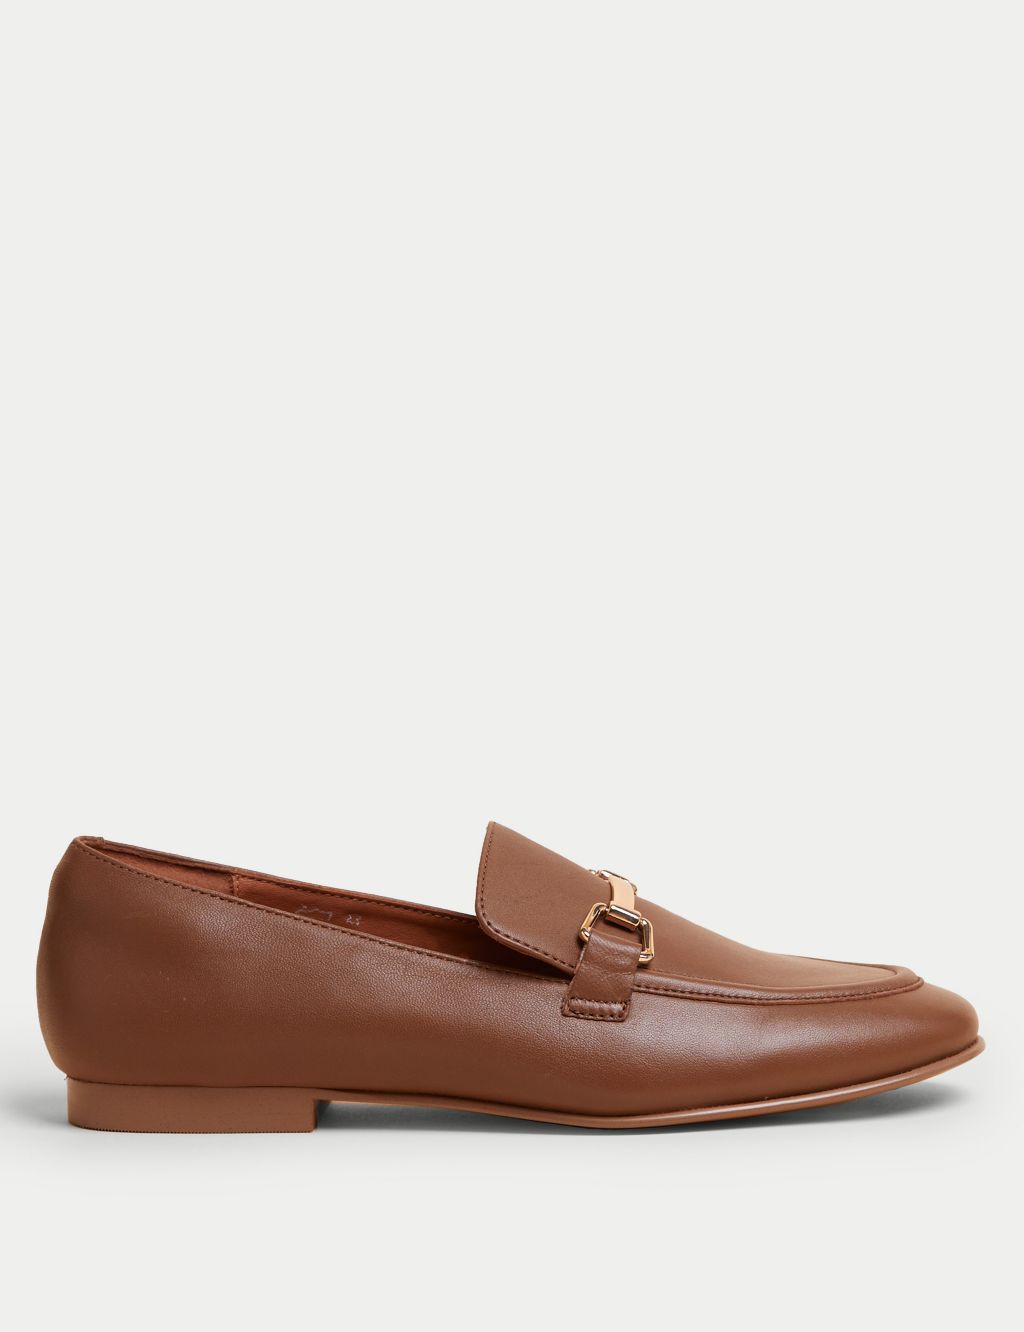 Leather Bar Trim Flat Loafers image 1